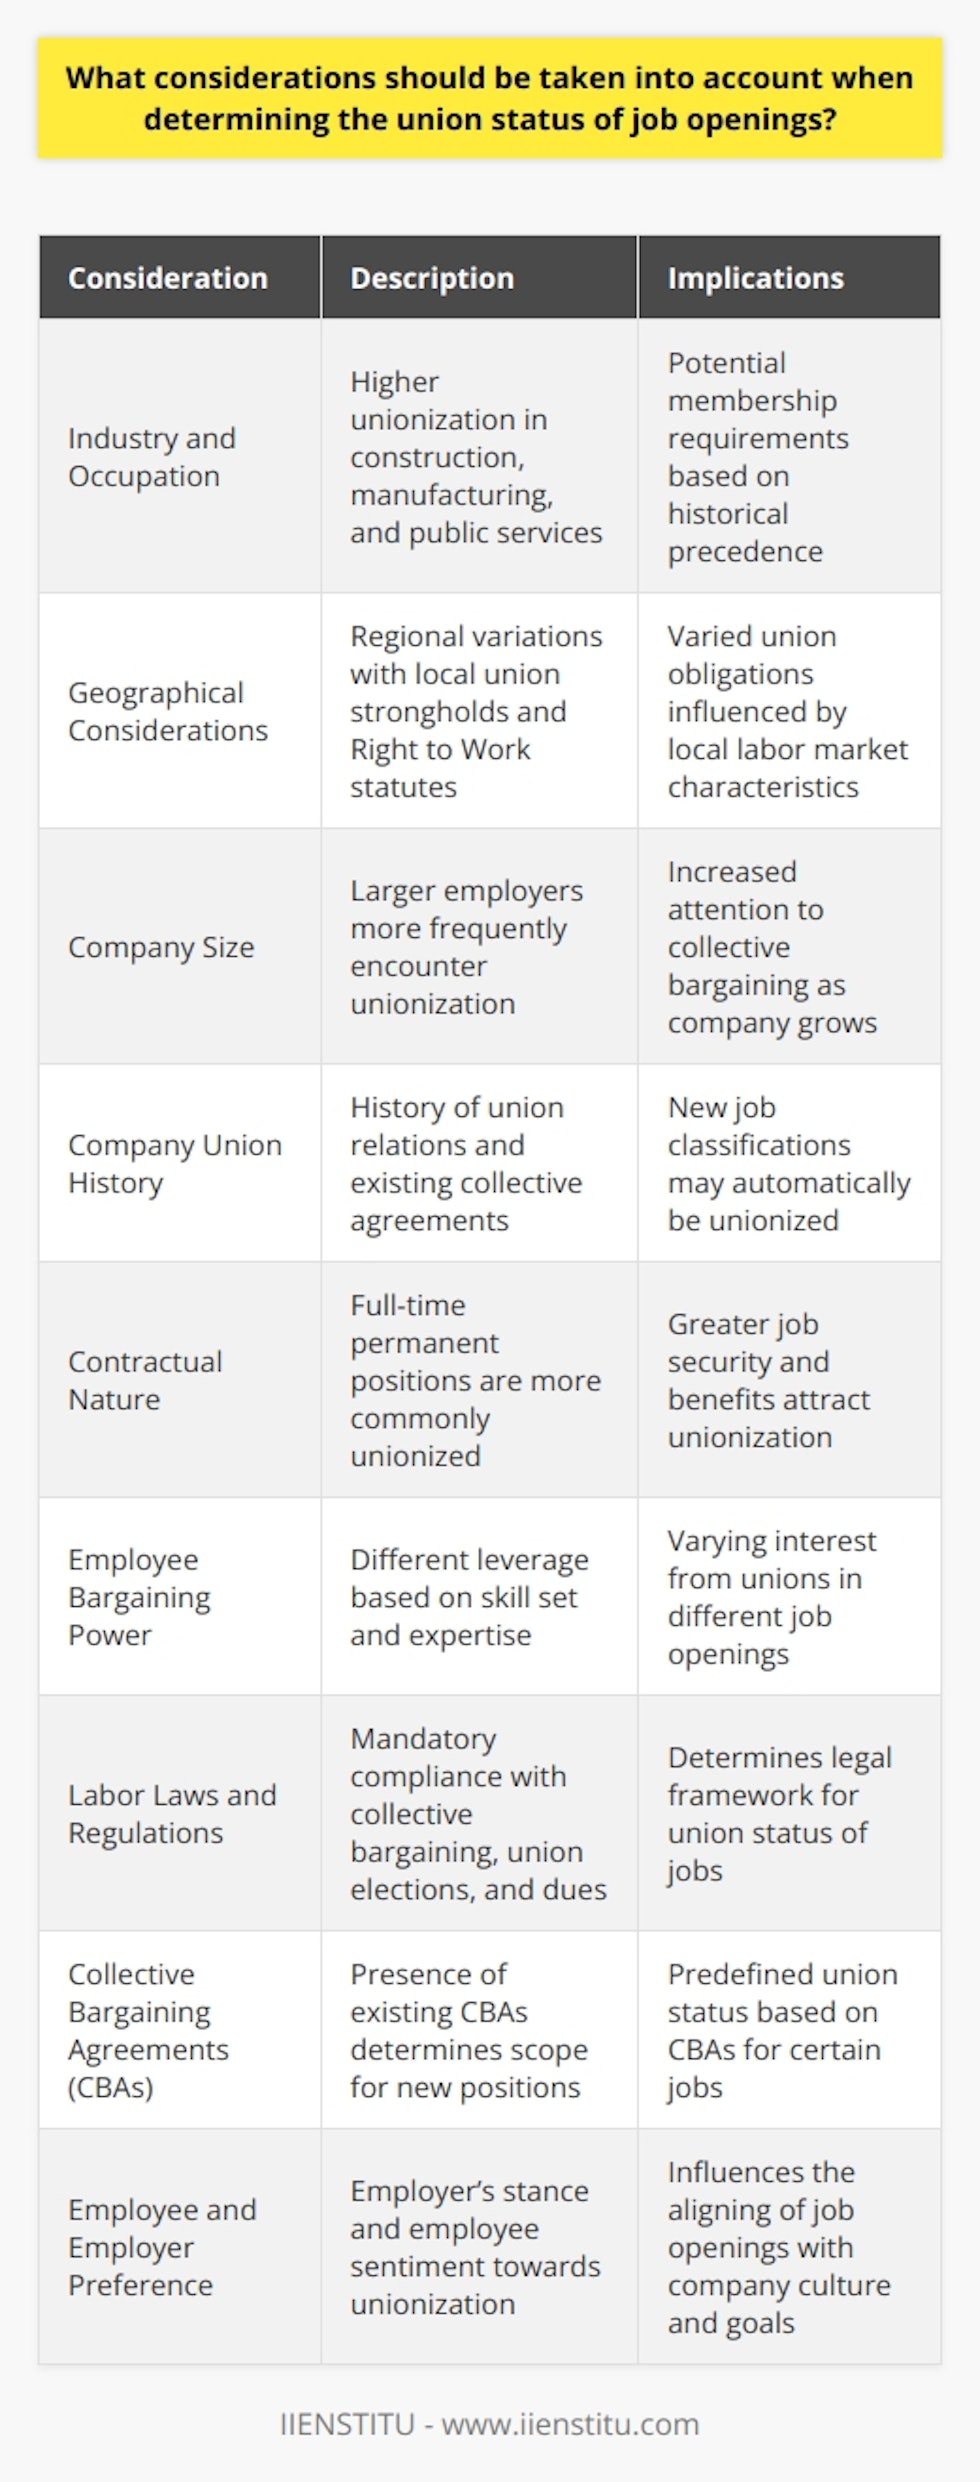 Determining the union status of job openings is an essential aspect of human resource management and labor relations. Employers need to be thorough in their assessment to ensure compliance with labor laws and to maintain harmonious employer-employee relationships. Here are considerations to take into account when determining the union status of job openings:1. **Industry and Occupation**: Certain industries like construction, manufacturing, automotive, and public services have traditionally higher rates of unionization. Similarly, skilled trades and occupations that have been historically organized should be carefully evaluated for potential union membership requirements.2. **Geographical Considerations**: Union prevalence can vary widely by region. For example, in the United States, states in the Midwest and Northeast typically have higher rates of unionization compared to the Southern states. Knowledge of local union strongholds is vital, as is awareness of any Right to Work legislation that affects union membership obligations.3. **Company Size**: Larger employers often encounter unionization more frequently than small businesses due to the larger workforce and the greater visibility and impact of collective bargaining. Companies need to monitor the threshold at which they could be more attractive for union organization efforts.4. **Company Union History**: A company with a history of union relationships may be more inclined to have new positions unionized, particularly if there are existing collective bargaining agreements that cover similar job classifications within the organization.5. **Contractual Nature**: Union membership is more common among full-time permanent positions compared to part-time or temporary roles. The greater the job security and benefits associated with a position, the more attractive it can be for union organization.6. **Employee Bargaining Power**: Skilled professionals with specialized expertise may have different bargaining power compared to entry-level workers. Employers must recognize that different job openings can command varying levels of interest from unions, depending on the perceived ability to negotiate favorable terms.7. **Labor Laws and Regulations**: It's paramount to understand the local, state, and federal labor laws that govern unionization rights. This includes laws that affect collective bargaining, union elections, and union dues payments, which can dictate the union status of a job.8. **Collective Bargaining Agreements (CBAs)**: If a company has a CBA in place, it's crucial to determine whether new job openings fall within the scope of the agreement. Some jobs might be predetermined as union positions based on existing CBAs, while for others, it might be negotiable.9. **Employee and Employer Preference**: Ultimately, the employer’s and employees' stance towards unionization will significantly shape the union status of job openings. Employers need to gauge worker sentiment and consider how union affiliation aligns with company culture and operational objectives.By addressing these considerations meticulously, employers can navigate the complexities surrounding the union status of job openings. They can legally and ethically fulfill their roles and obligations, while potentially enhancing the appeal of job openings through a clear understanding of the employment landscape they operate within, always adhering to a position of neutrality and respect for workers' rights to organize if they choose to do so.